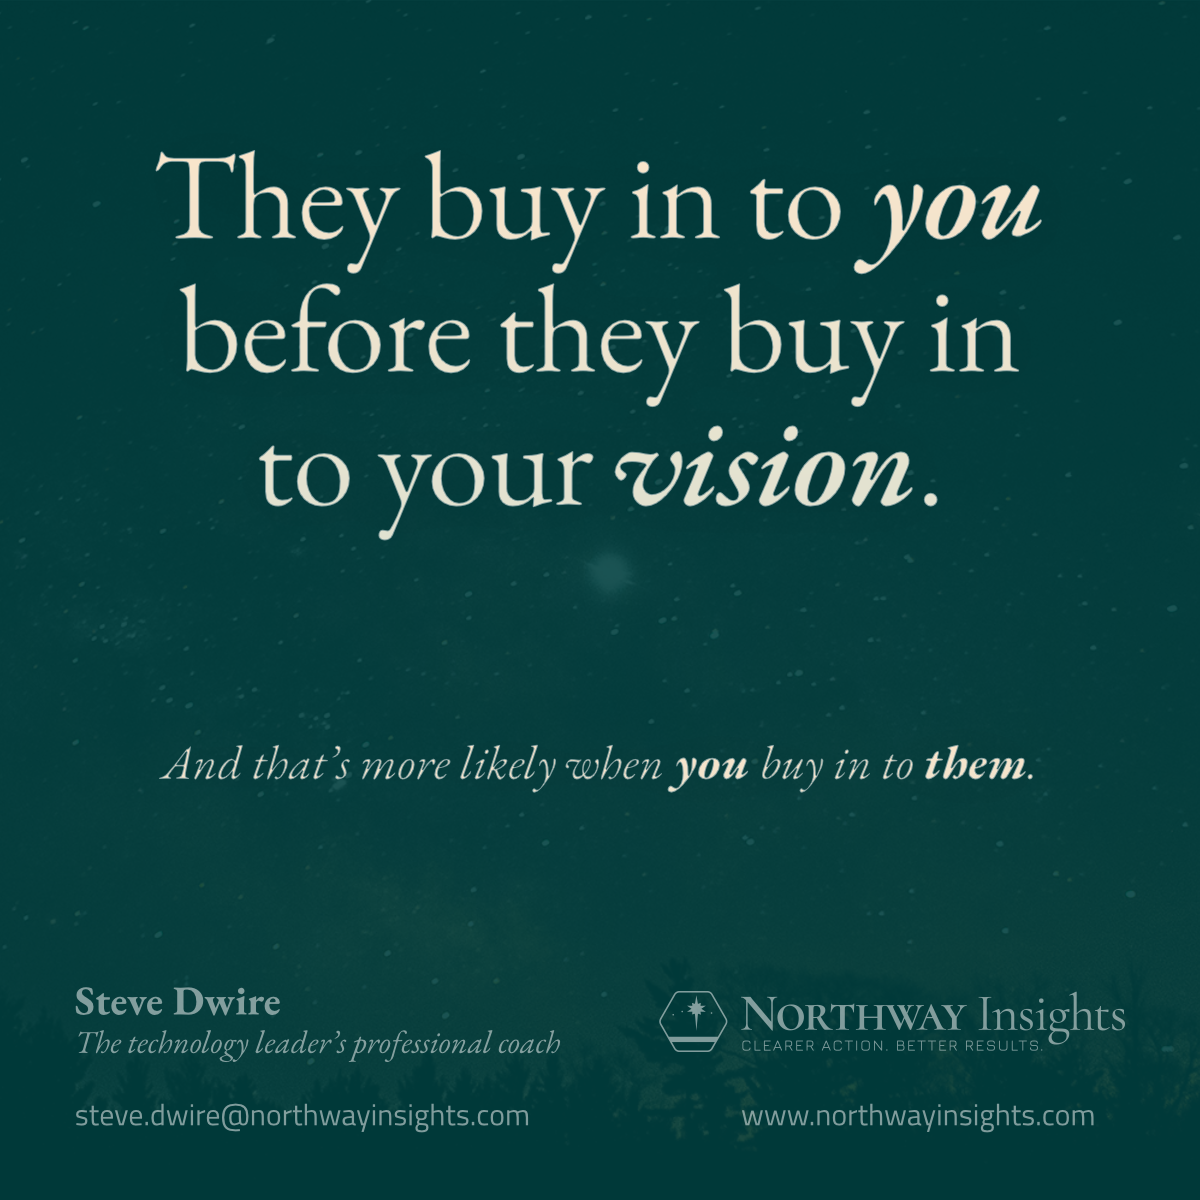 They buy in to you before they buy in to your vision. (And that's more likely when you buy in to them.)